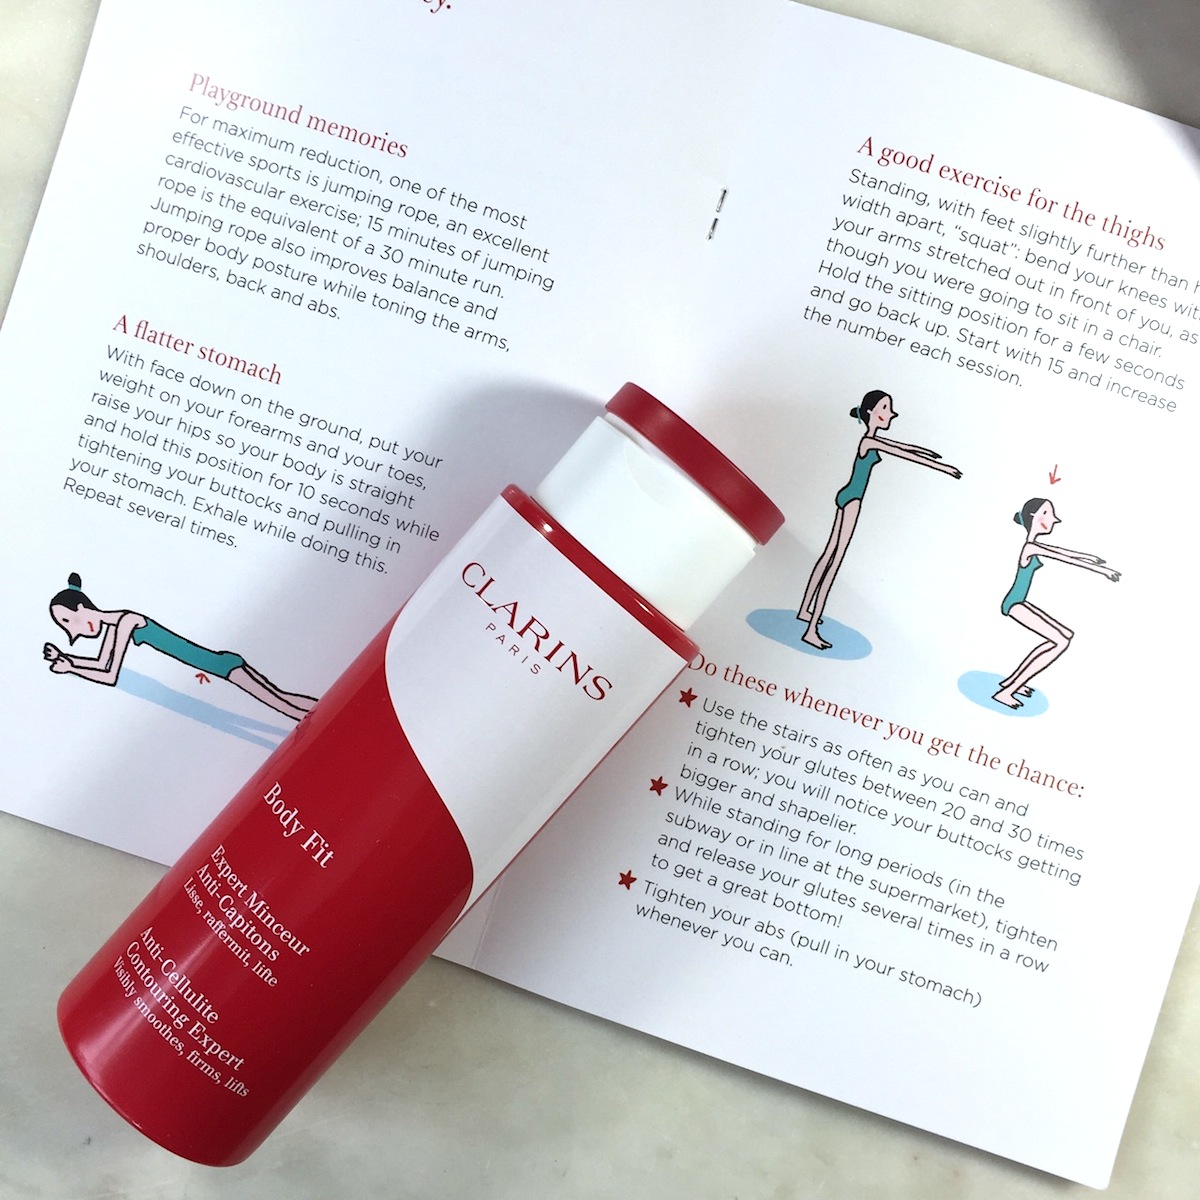 CLARINS BODY FIT ANTI-CELLULITE CONTOURING EXPERT REVIEW #shorts